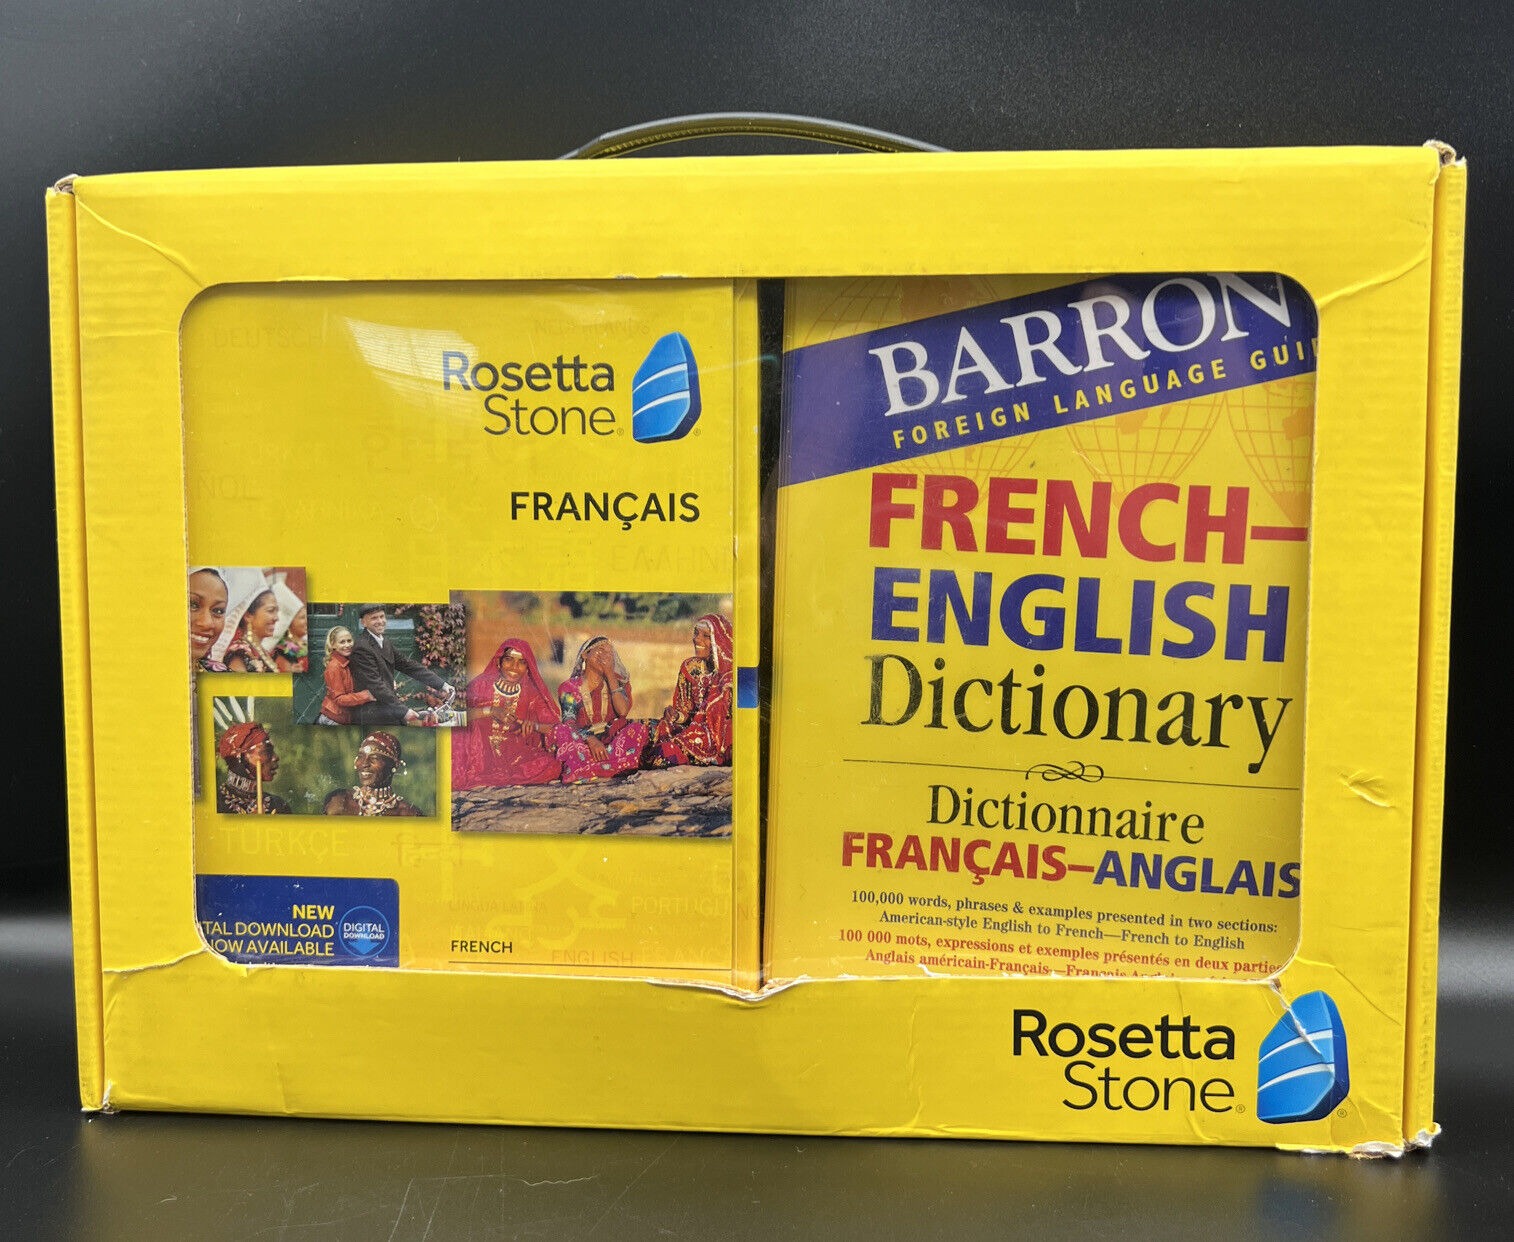 2014 Rosetta Stone French Grammar Book & Dictionary plus, New Sealed Software